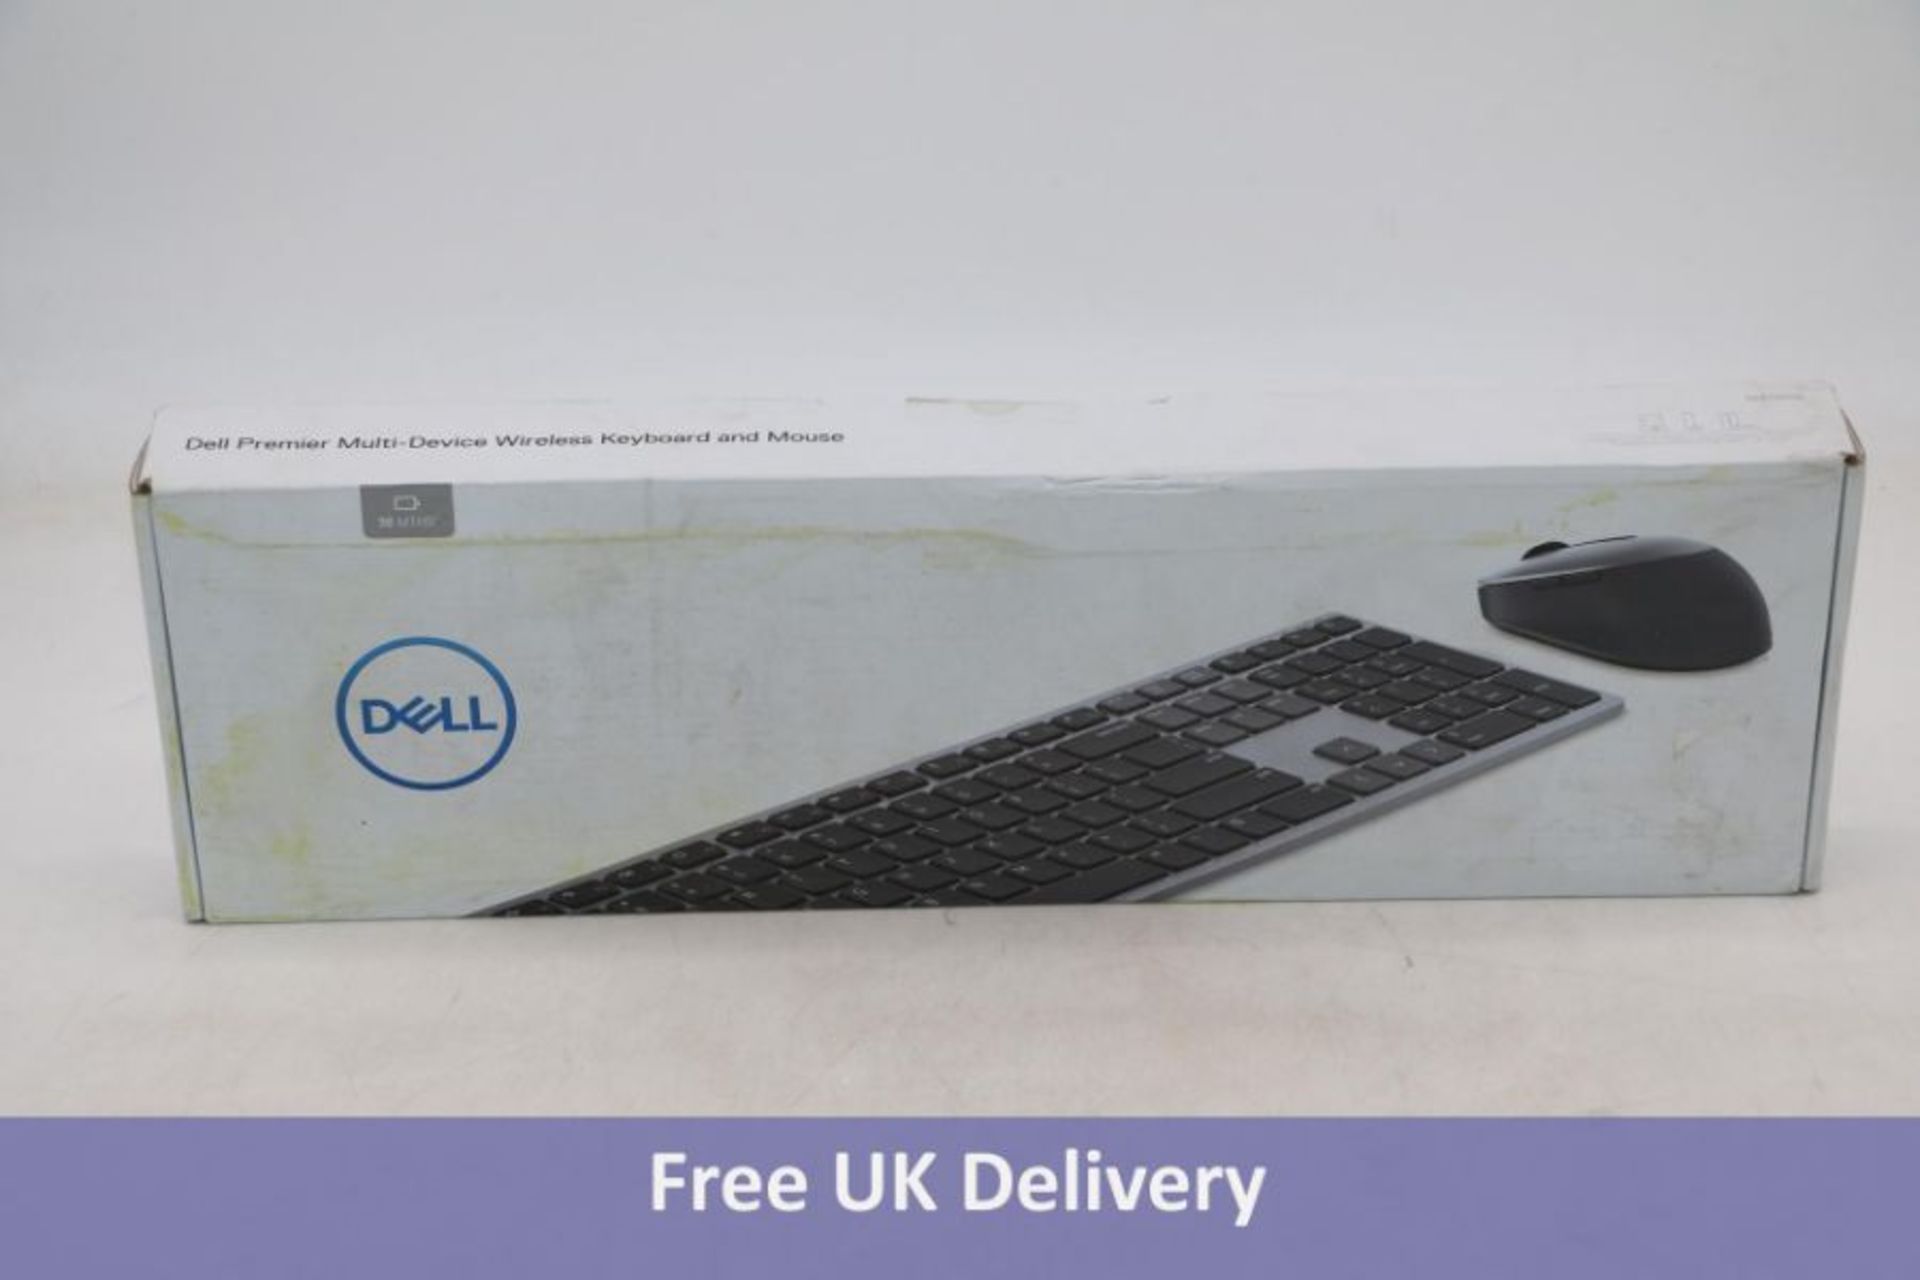 Dell Premier Keyboard and Mouse